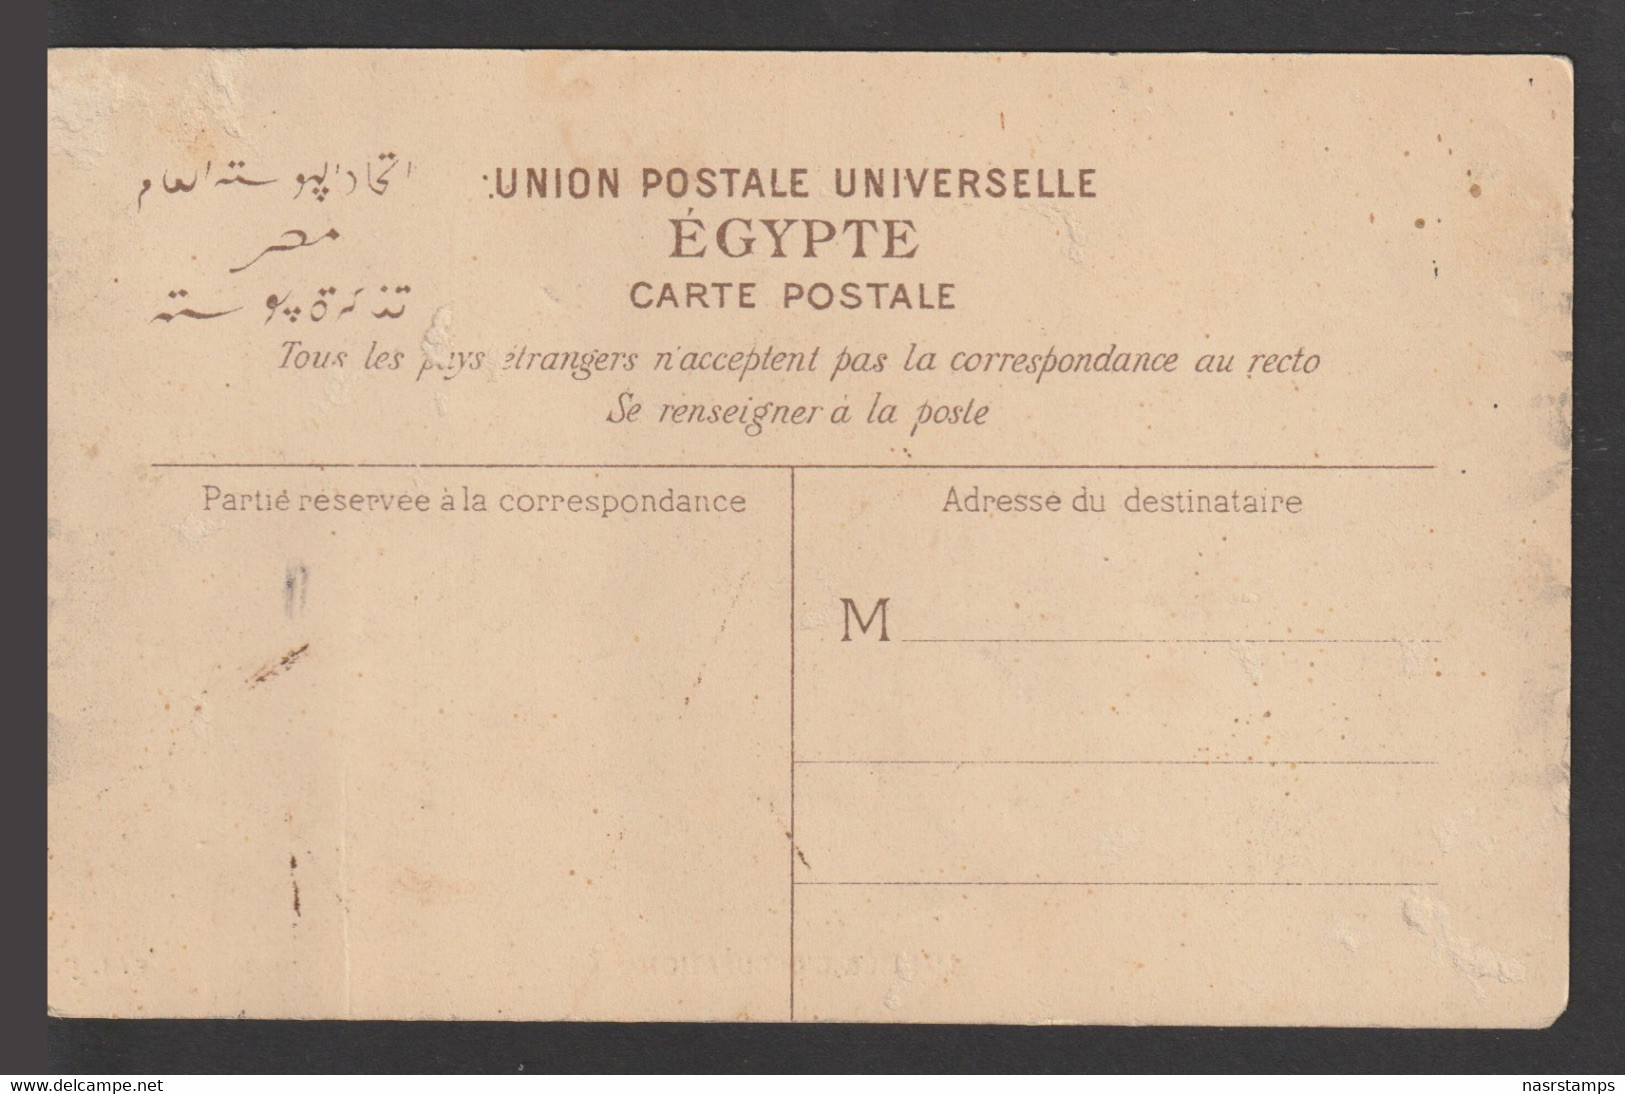 Egypt - Rare - Vintage Post Card - The Occupation Army In Egypt - 1866-1914 Khedivaat Egypte